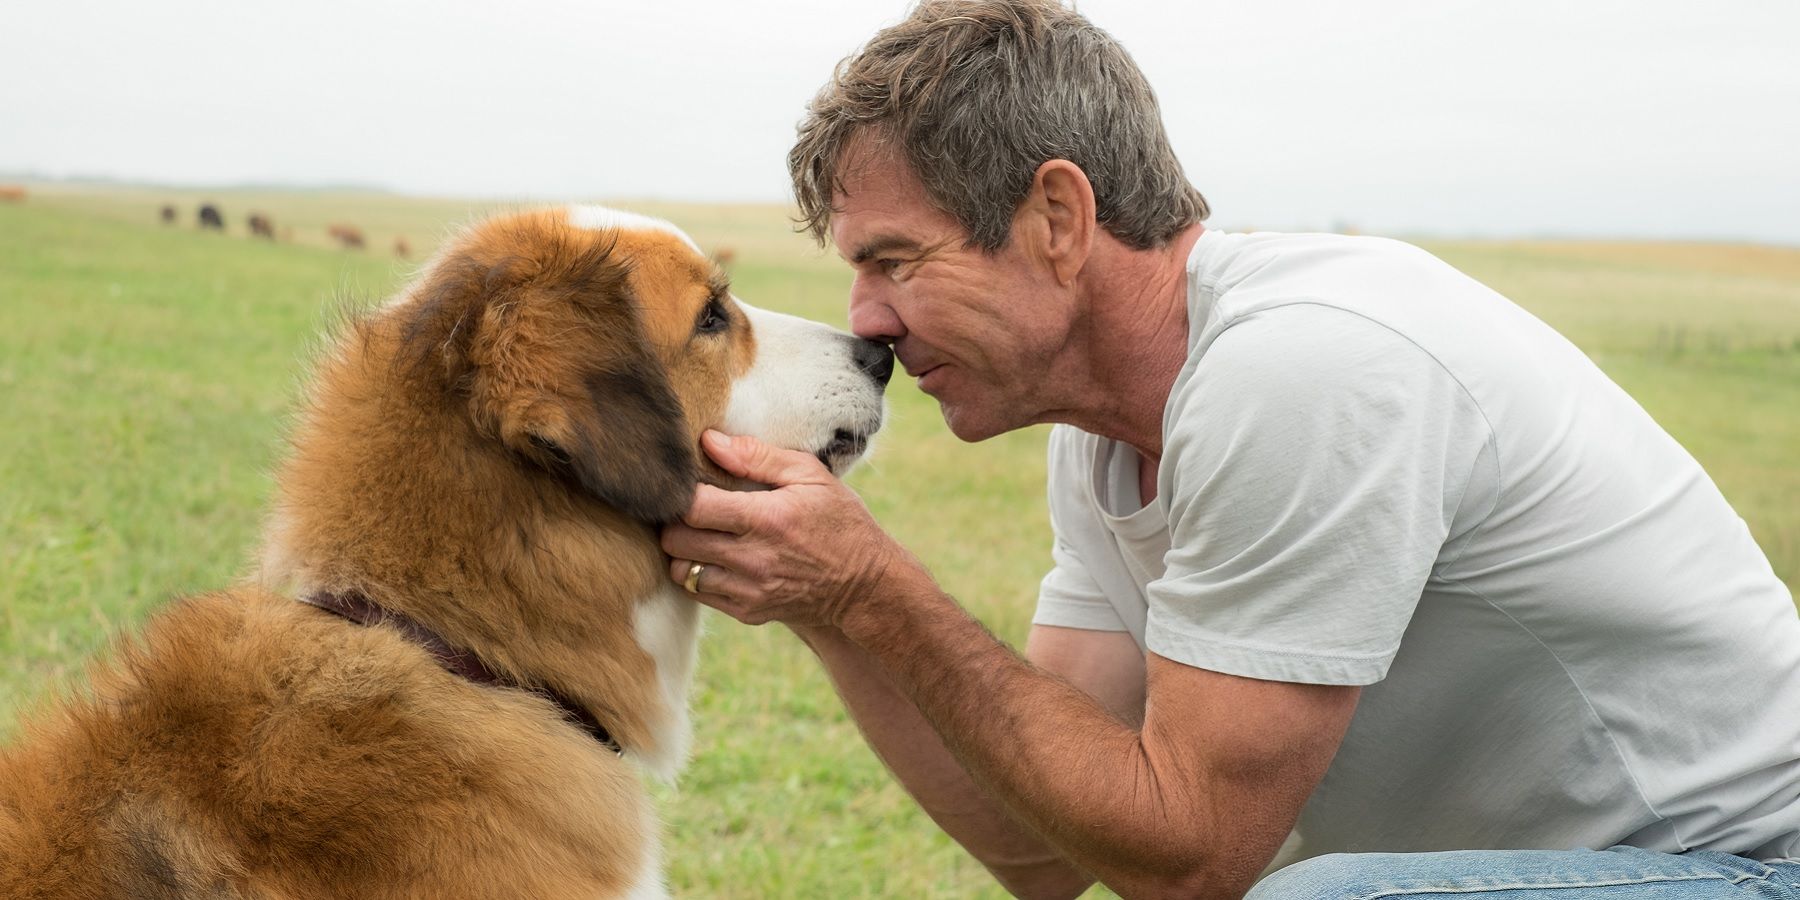 Ethan petting a dog in A Dog's Purpose